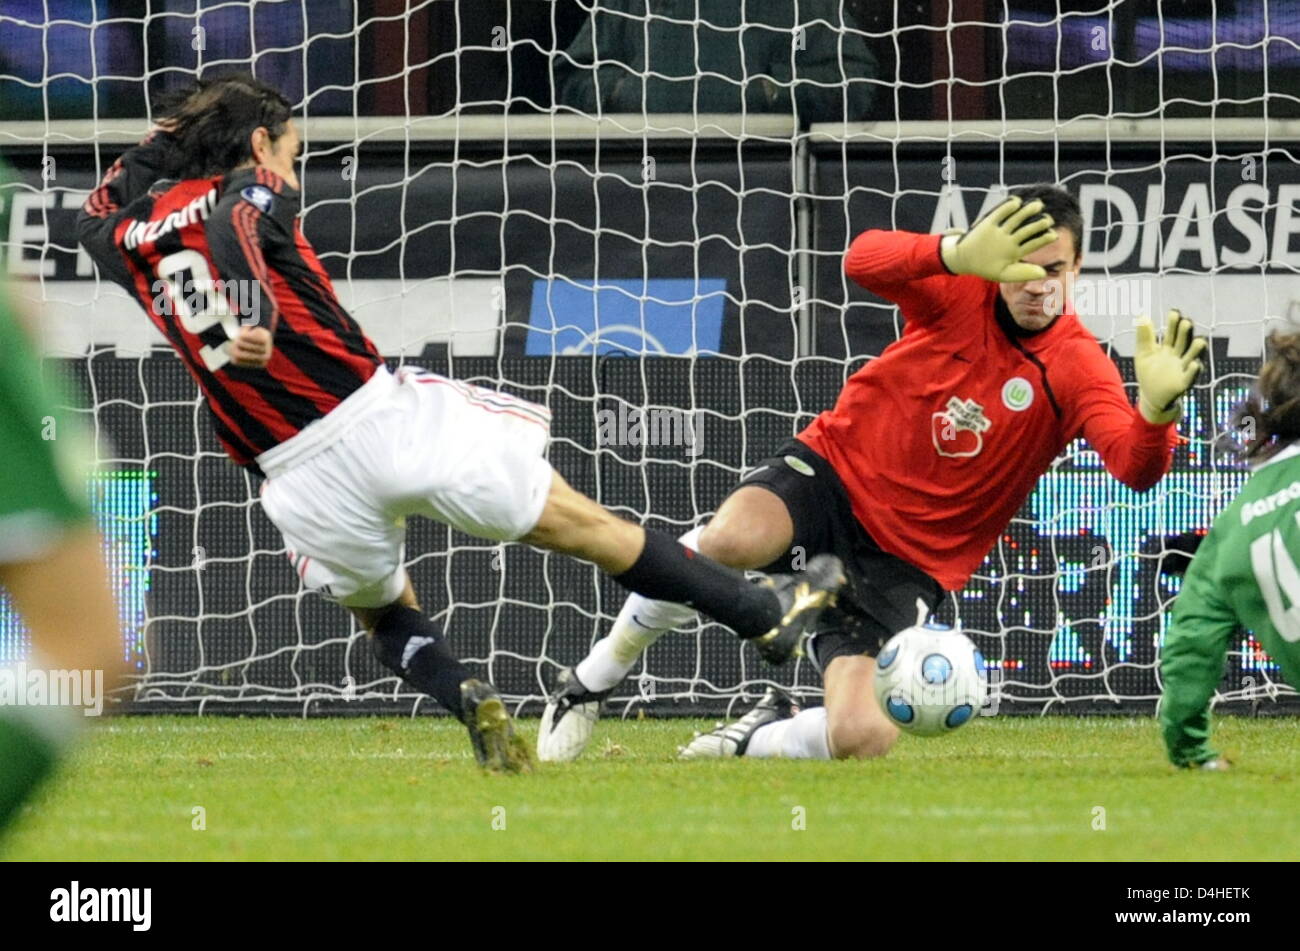 Wolfsburg?s goalkeeper Diego Benaglio (R) and Milan?s striker  Filippo Inzaghi seen in action during the UEFA Cup match AC Mailand vs VfL Wolfsburg at San Siro Stadium in Milan, Italy, 17 December 2008. The teams tied 2-2. Photo: Jochen Luebke Stock Photo